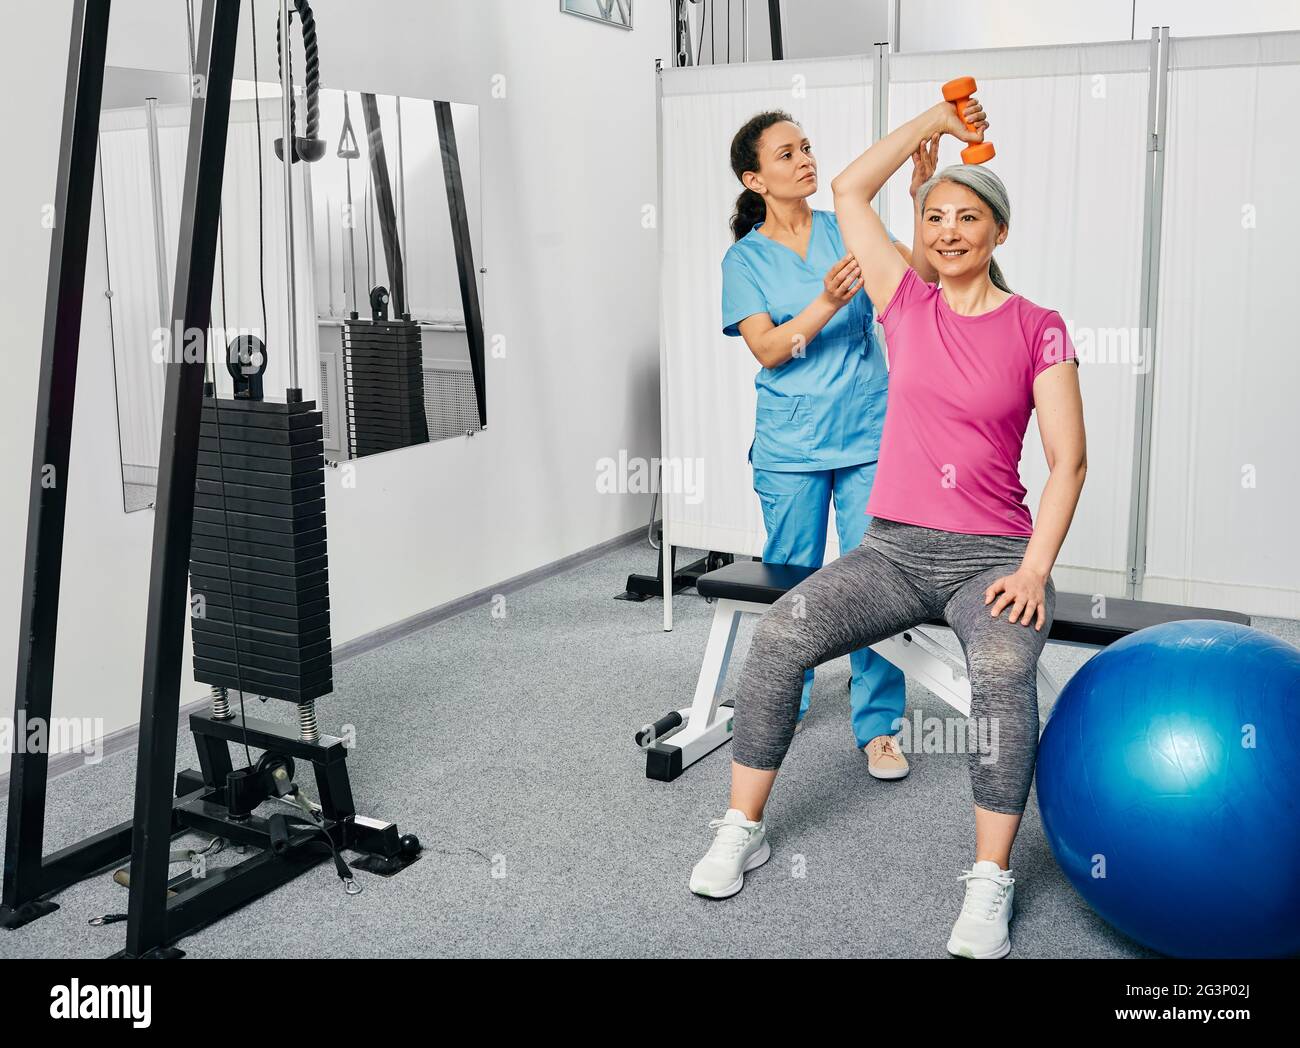 Physical therapy. Mature woman lift a dumbbell, she doing treatment exercise with her physiotherapist Stock Photo